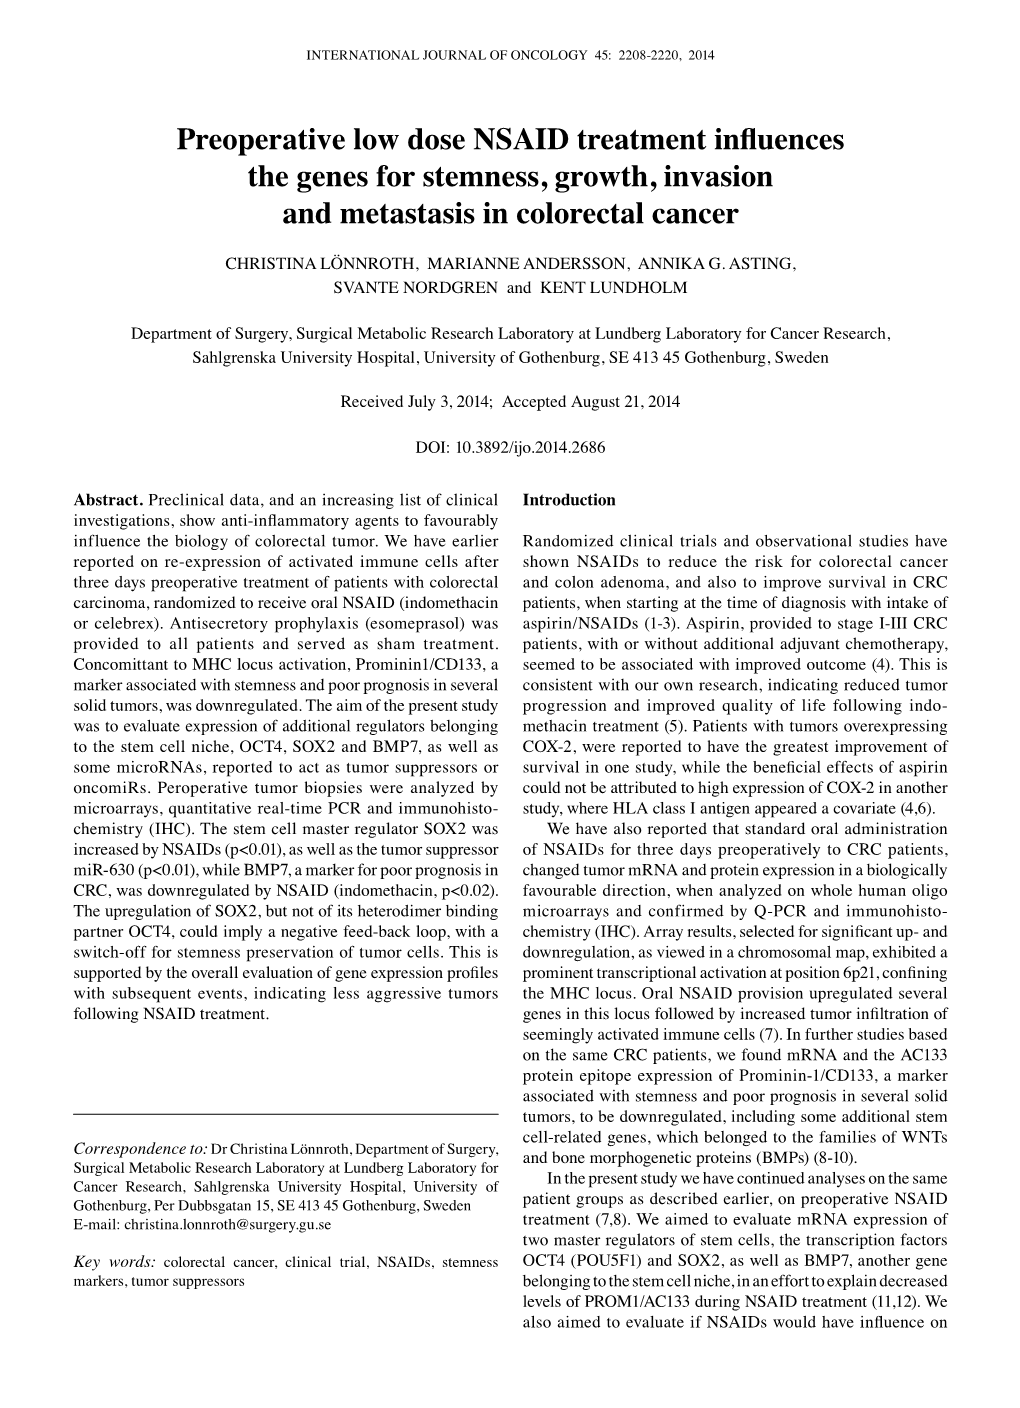 Preoperative Low Dose NSAID Treatment Influences the Genes for Stemness, Growth, Invasion and Metastasis in Colorectal Cancer